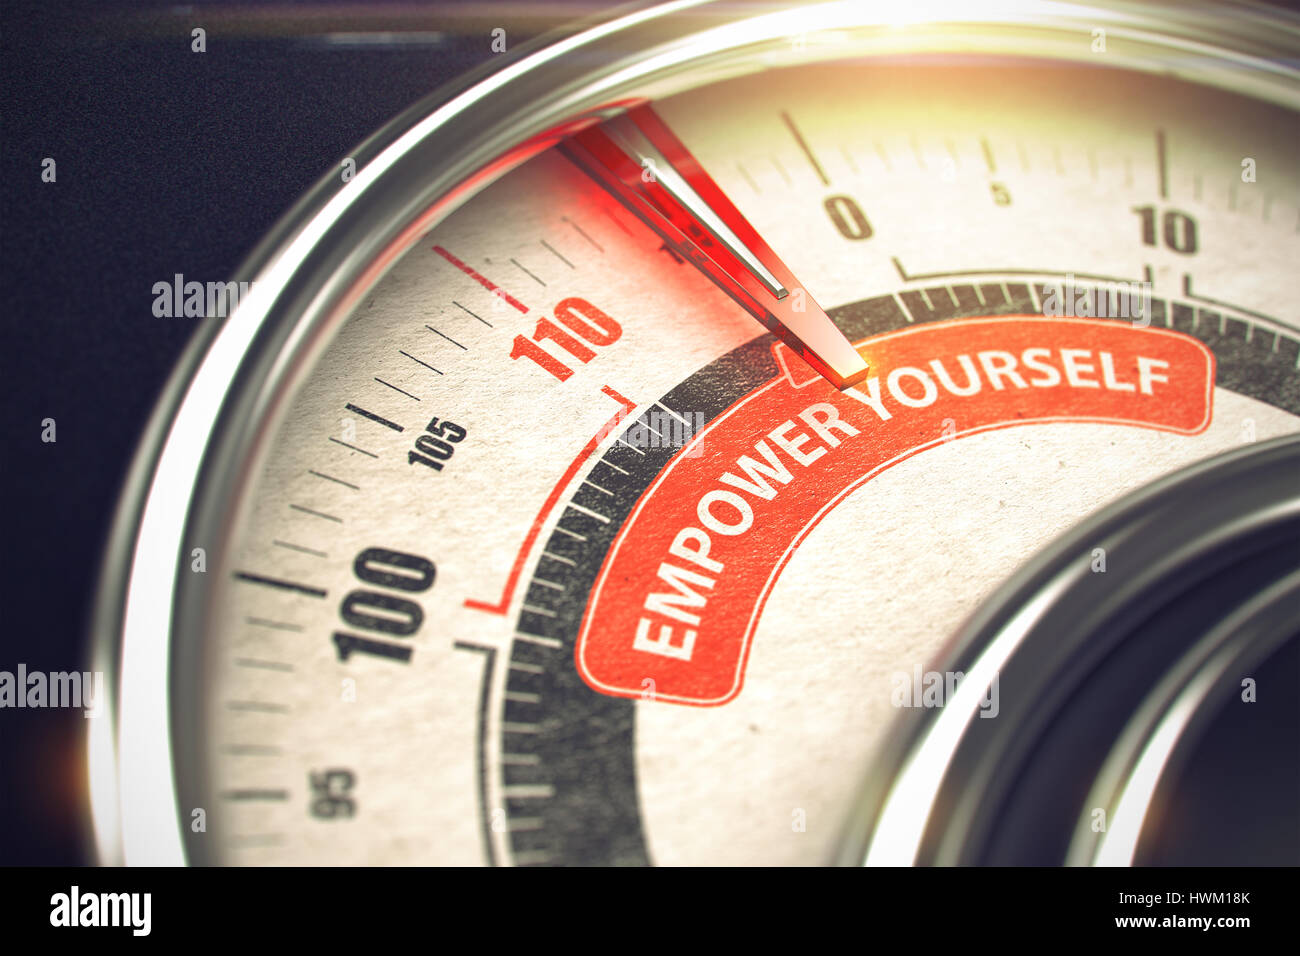 Empower Yourself - Business or Marketing Mode Concept. 3D. Stock Photo